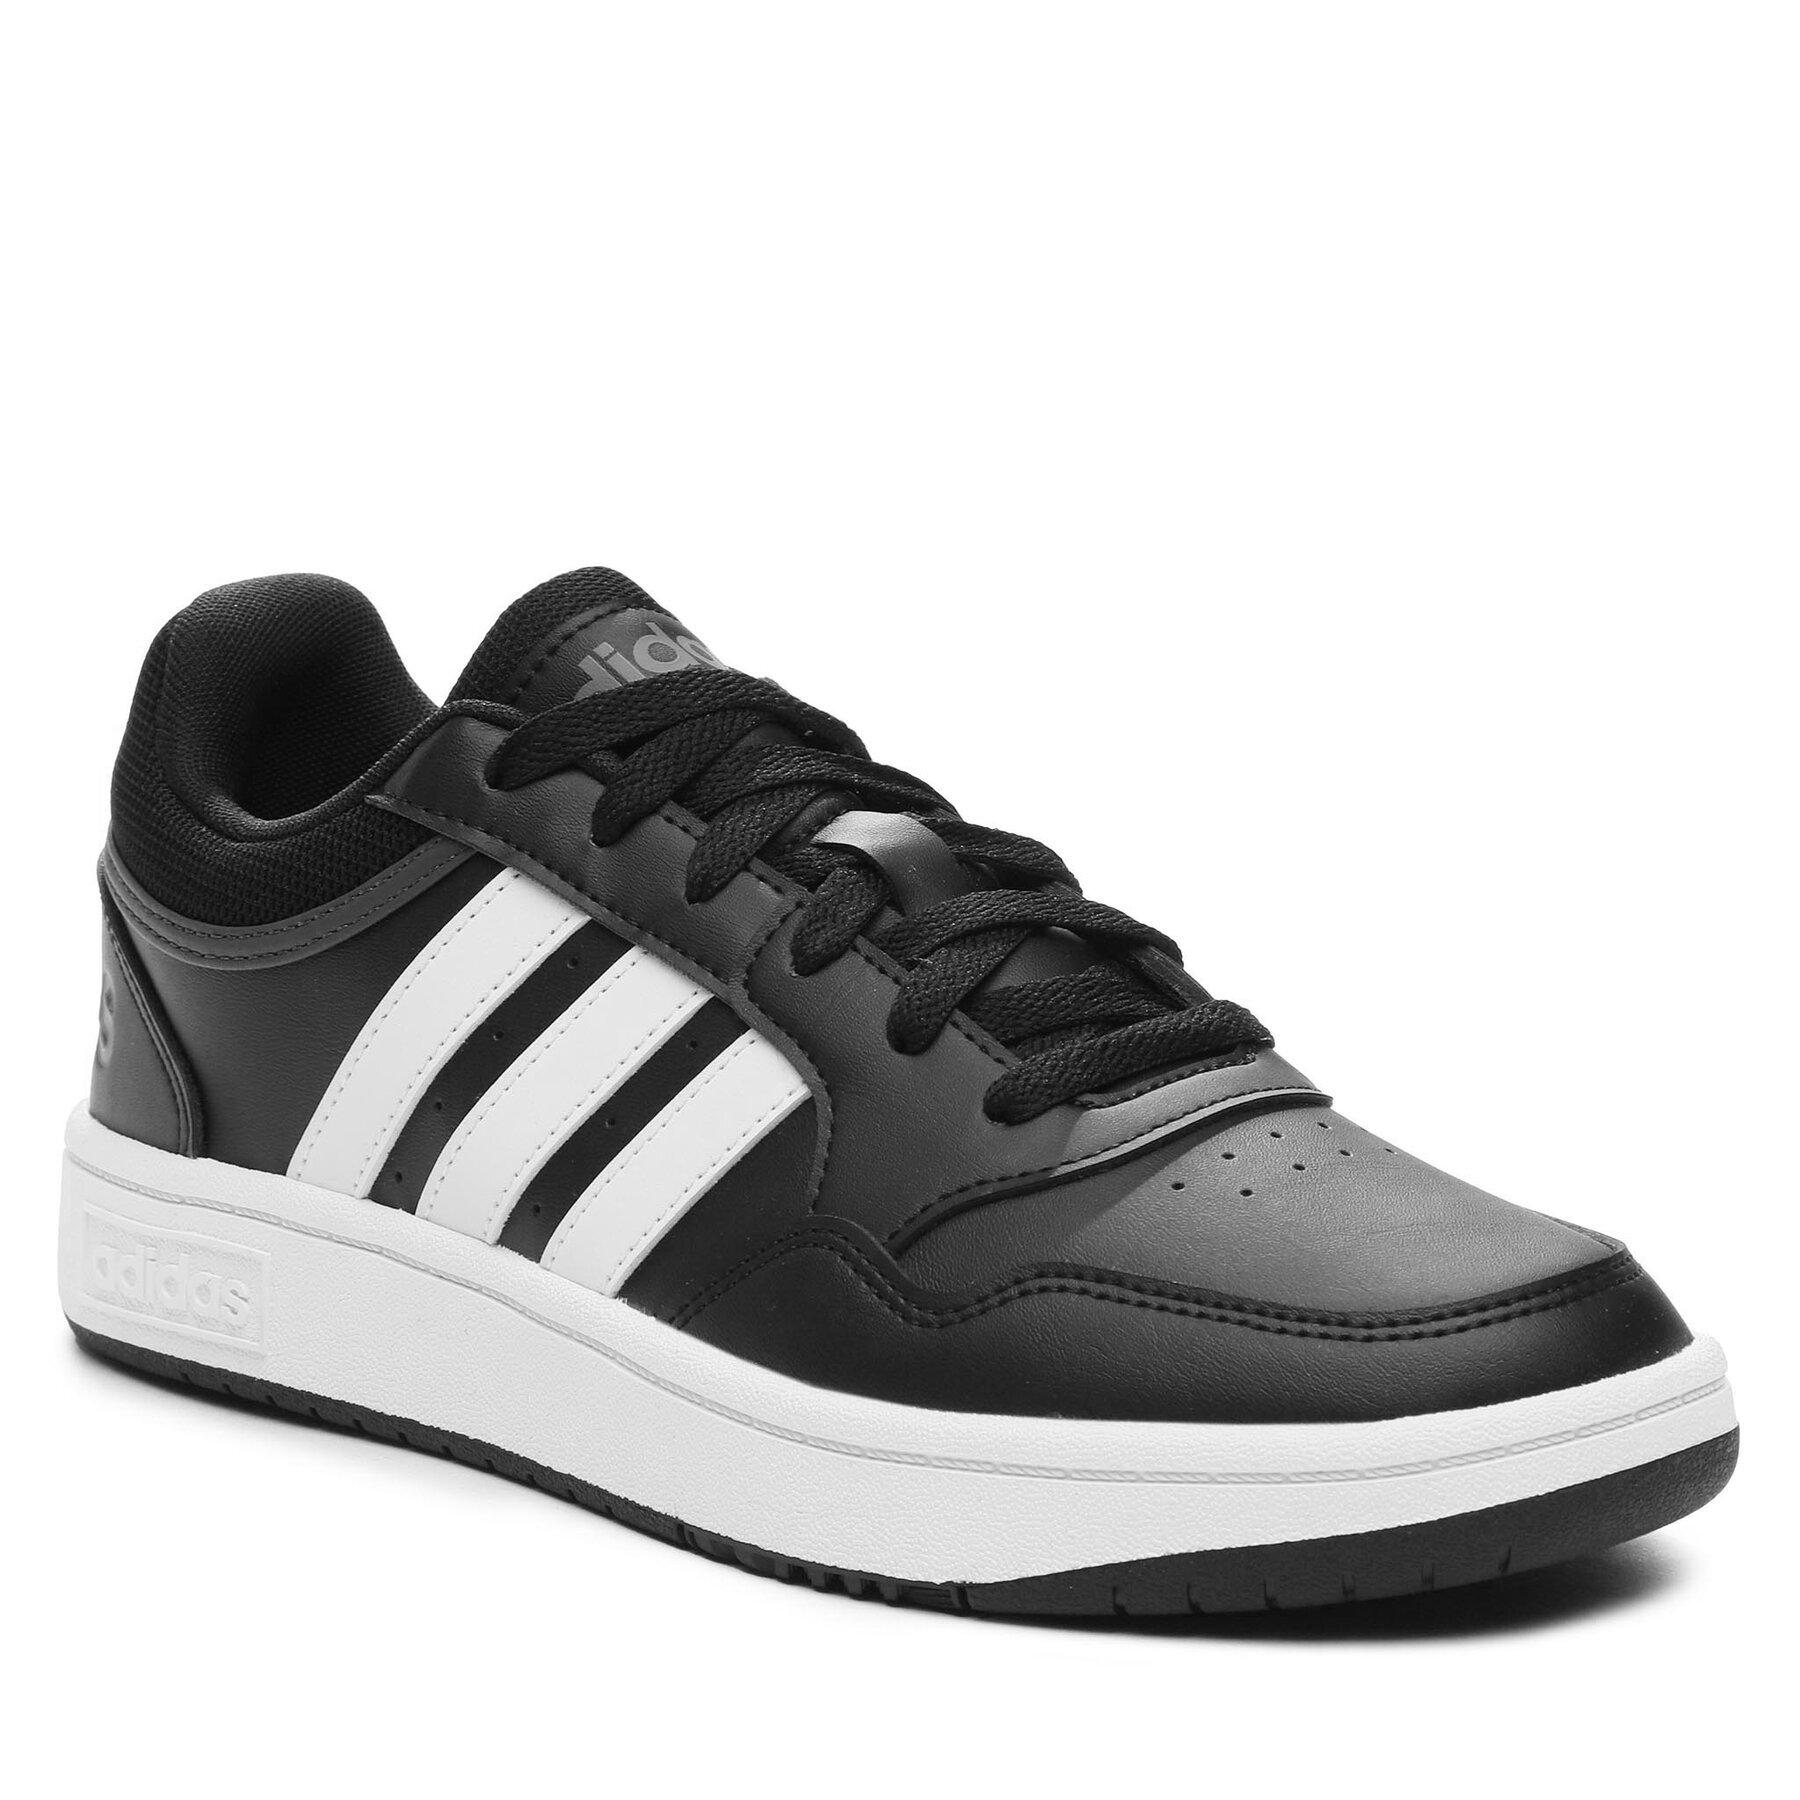 Adidas Hoops 3 0 Low Classic Vintage Noir Black White Chaussures Homme vue2